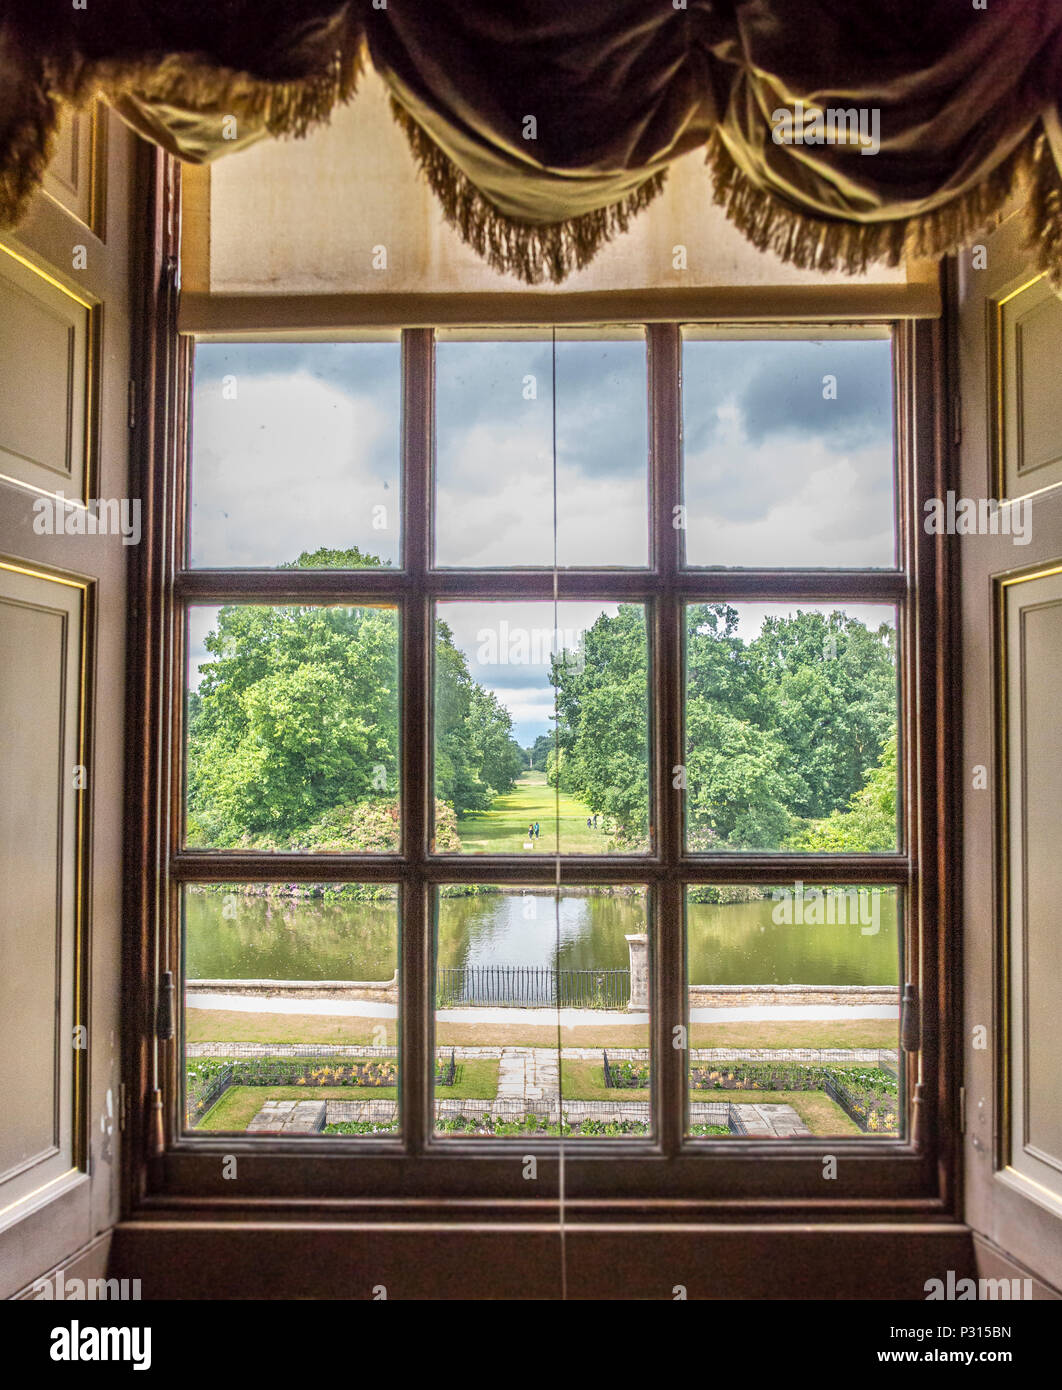 Interior image at Altricham National Trust house in Cheshire Stock Photo